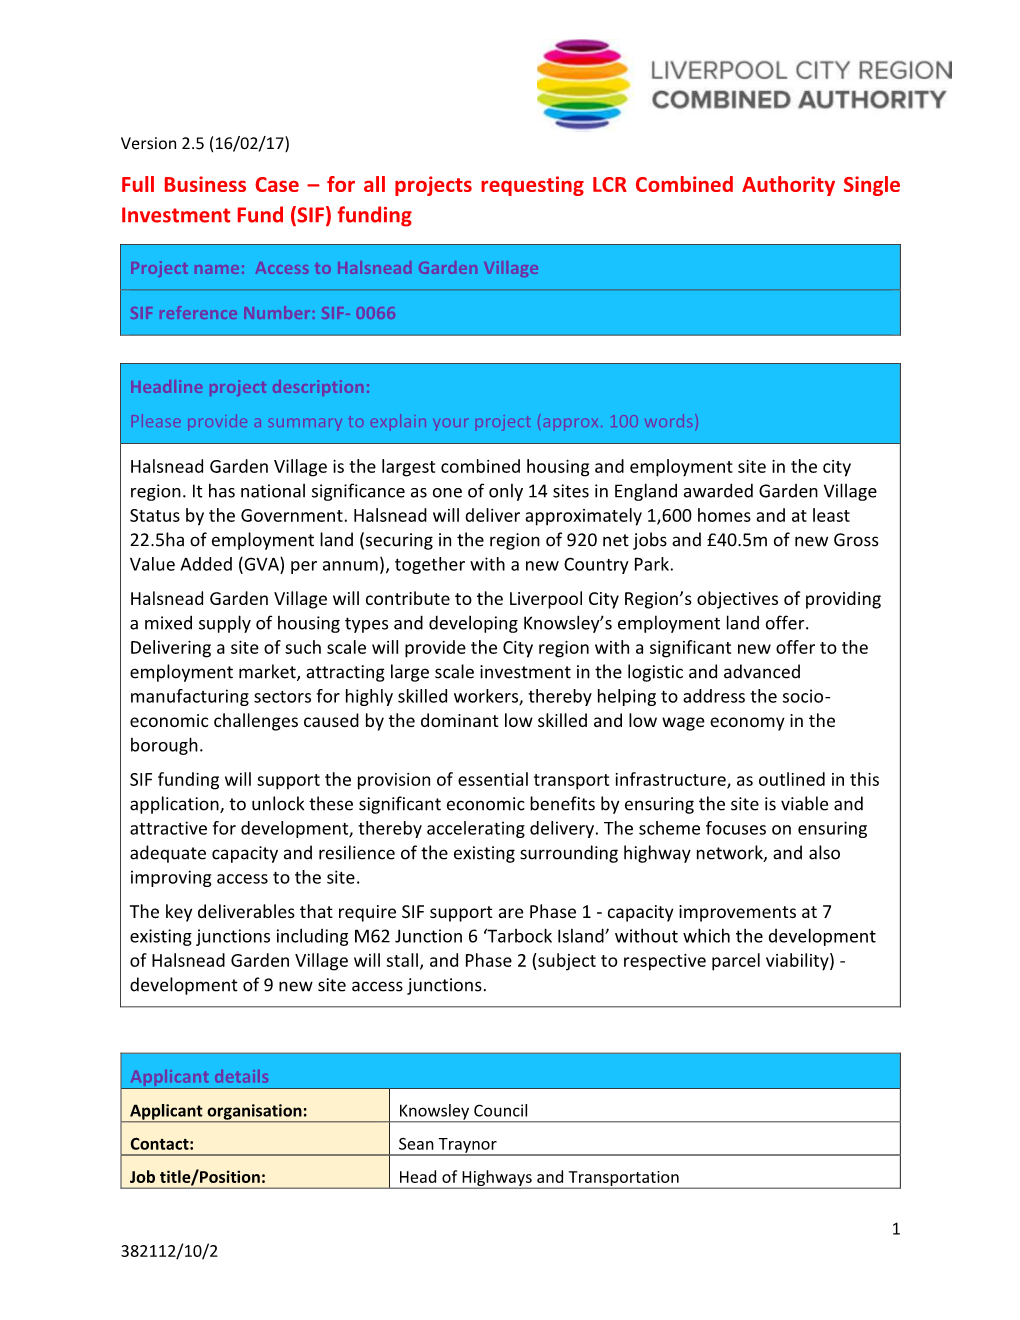 Full Business Case – for All Projects Requesting LCR Combined Authority Single Investment Fund (SIF) Funding